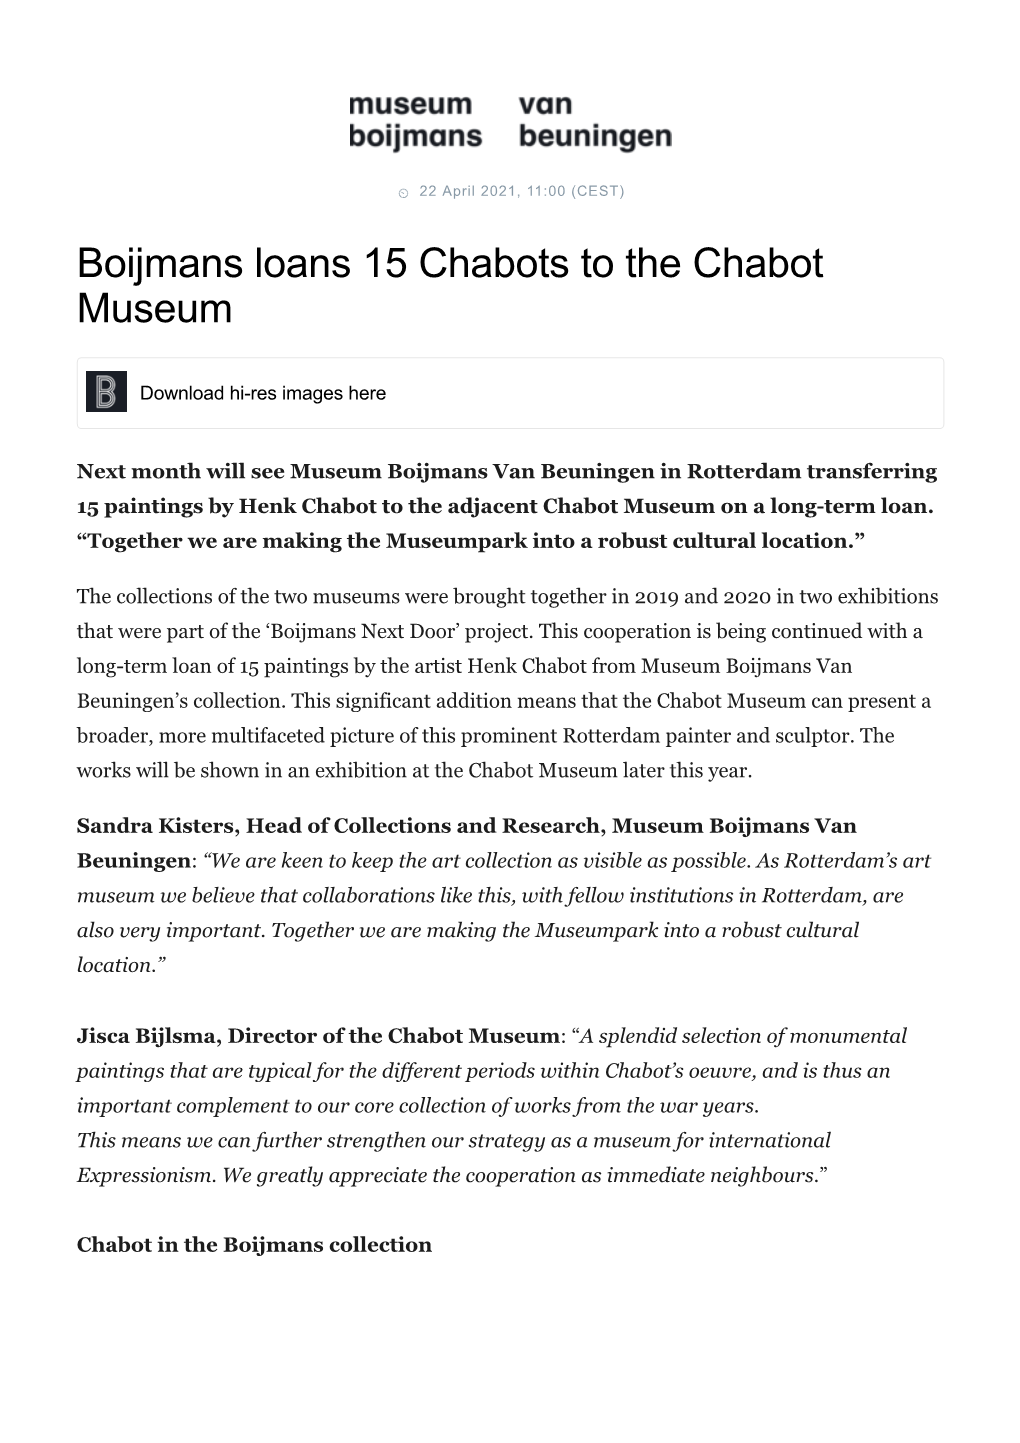 Boijmans Loans 15 Chabots to the Chabot Museum